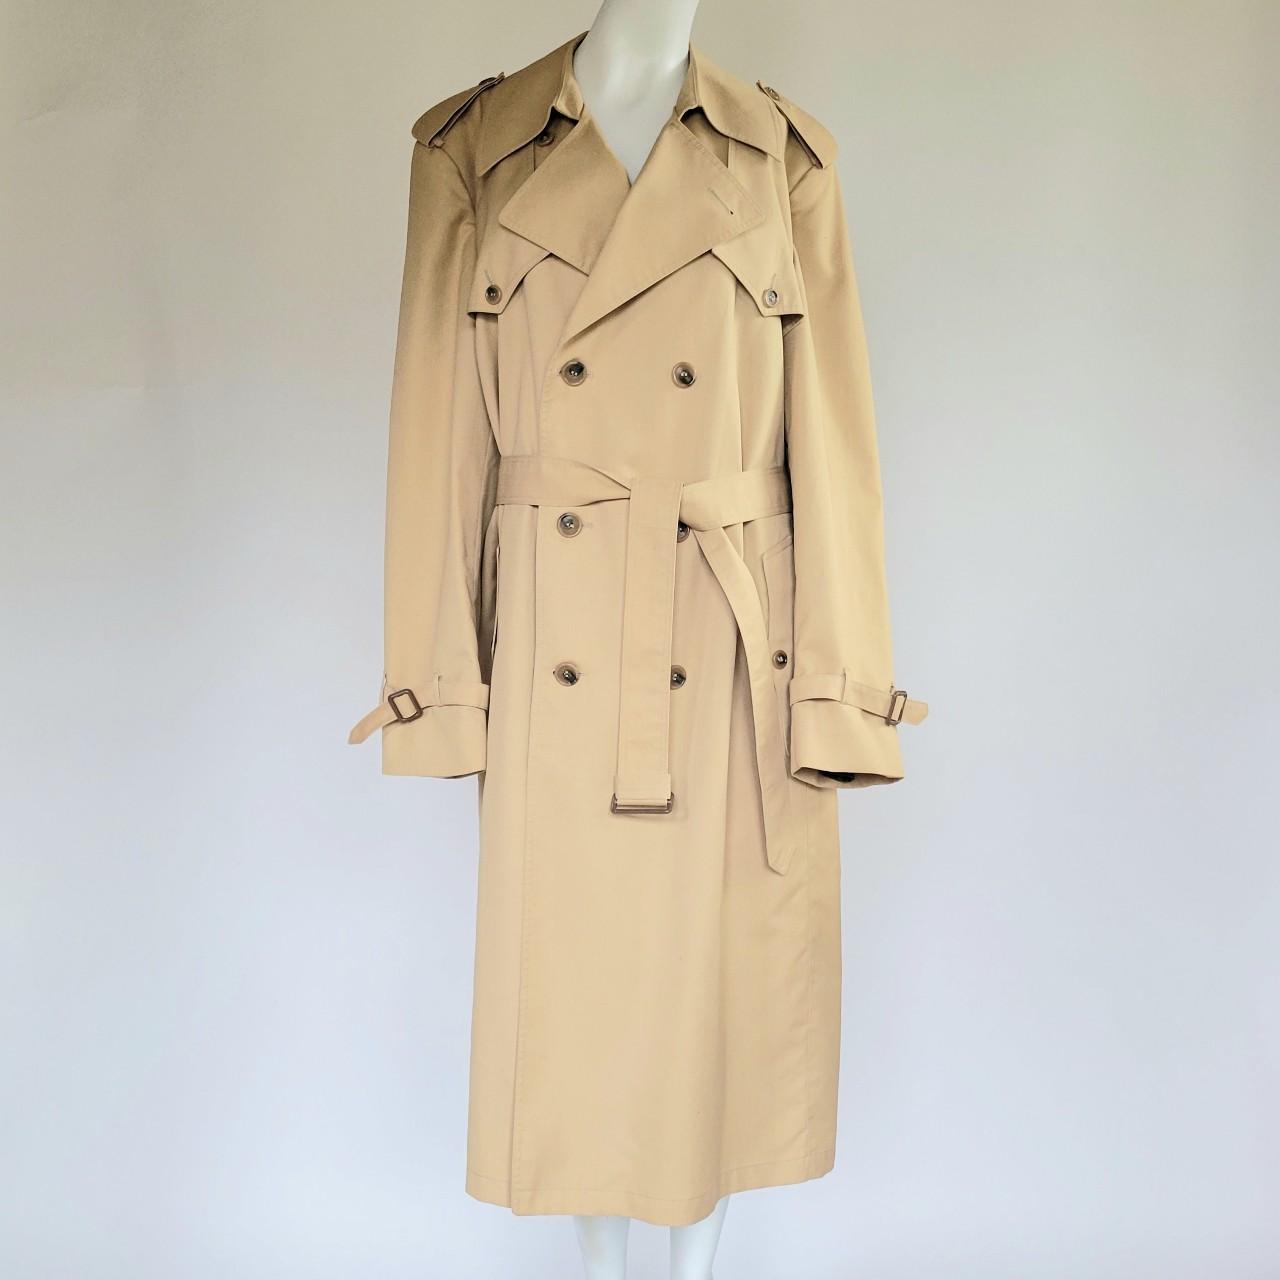 Insane vintage Christian Dior trench coat in amazing